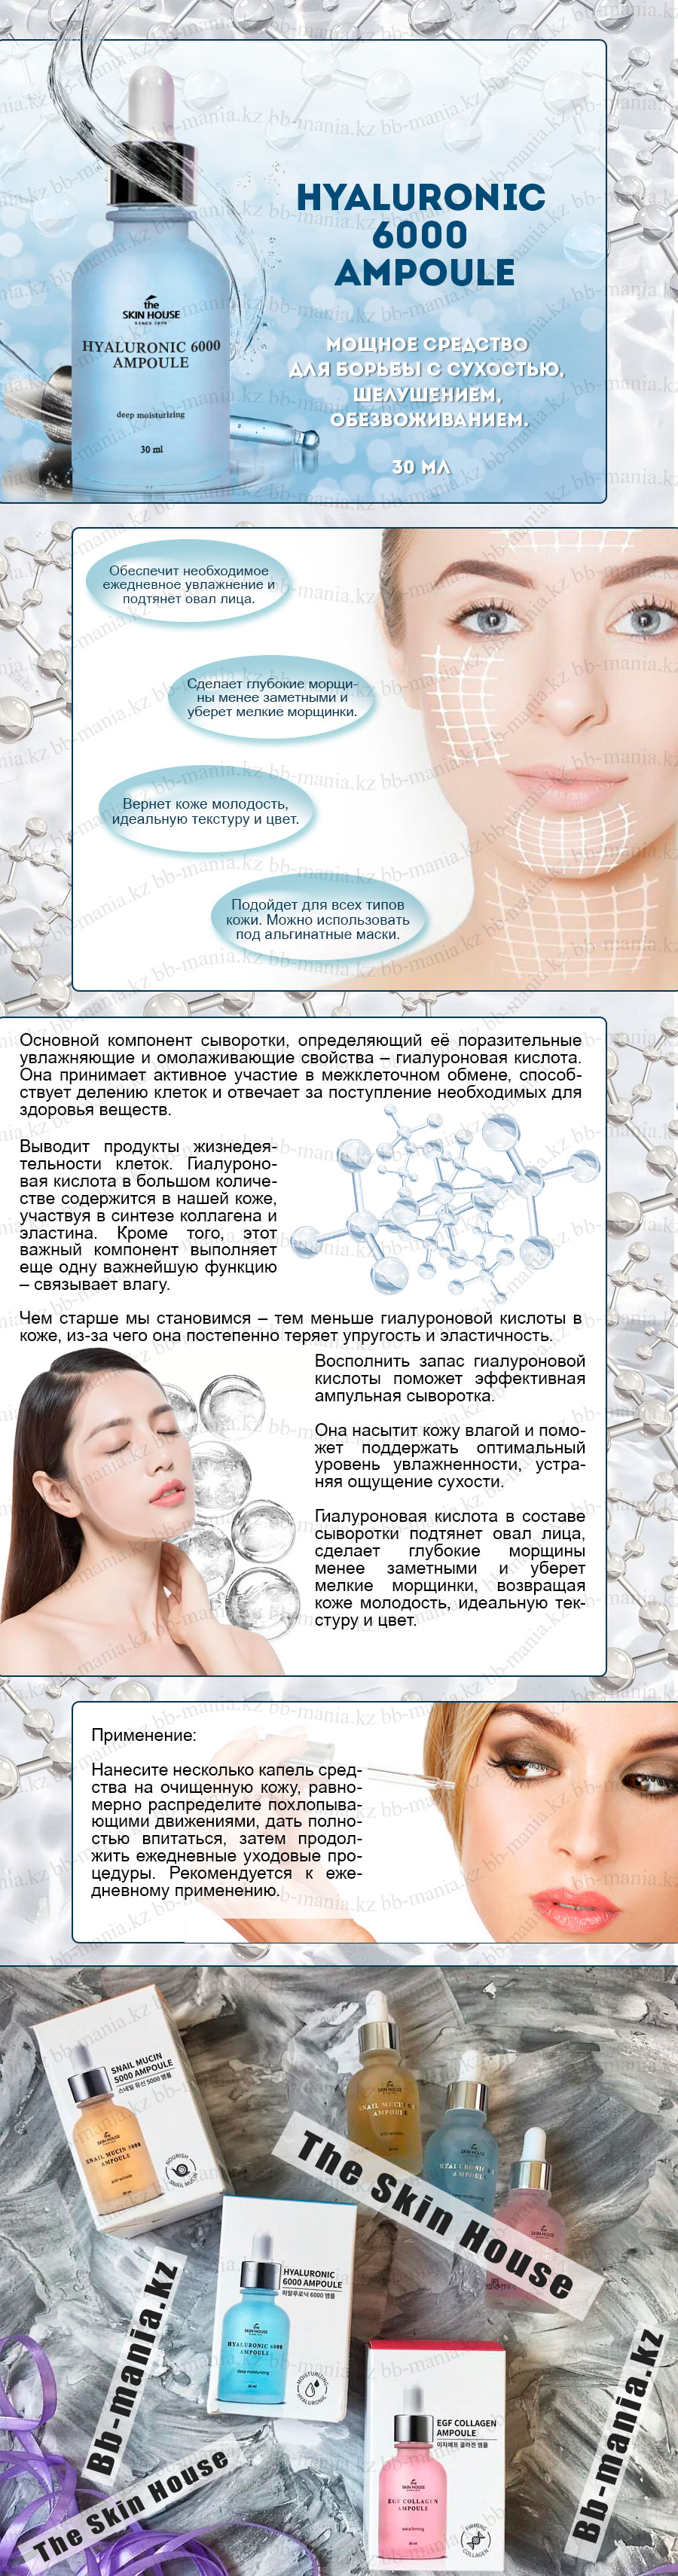 Hyaluronic-6000-Ampoule-[The-Skin-House]-min